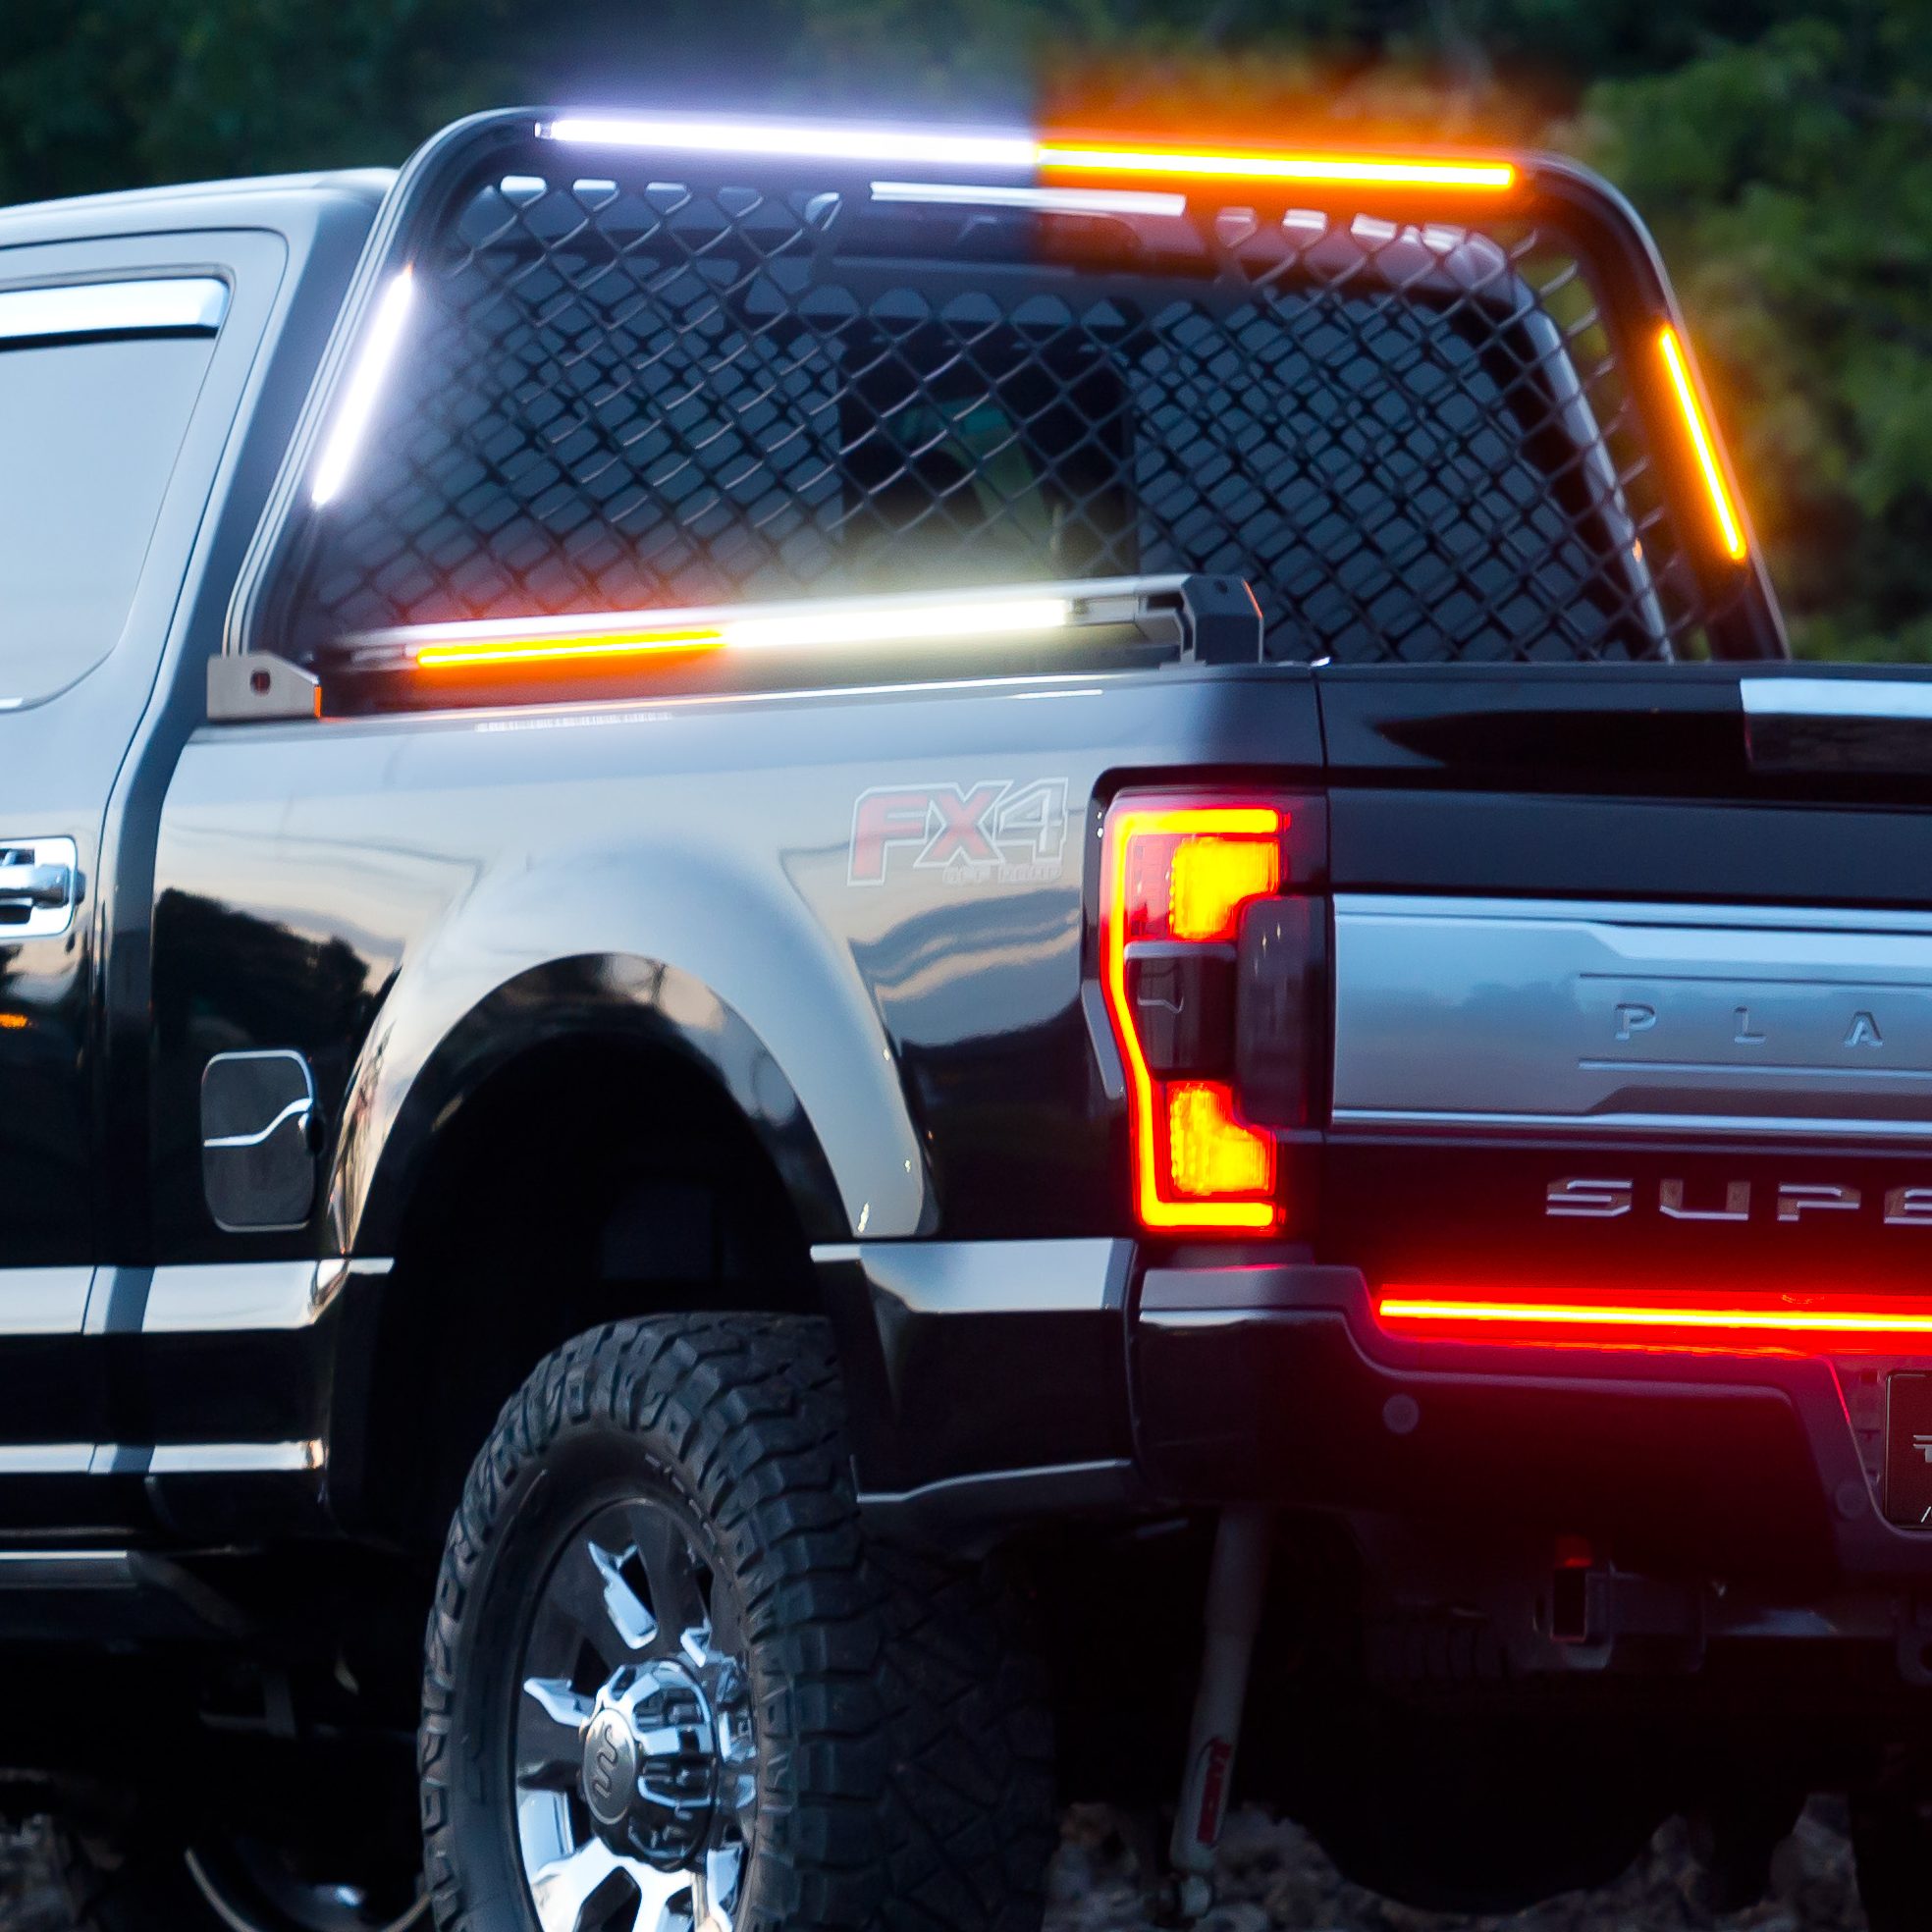 2018 F-250 Superduty Featuring Amber & White Construction Truck Strobe  Lights 